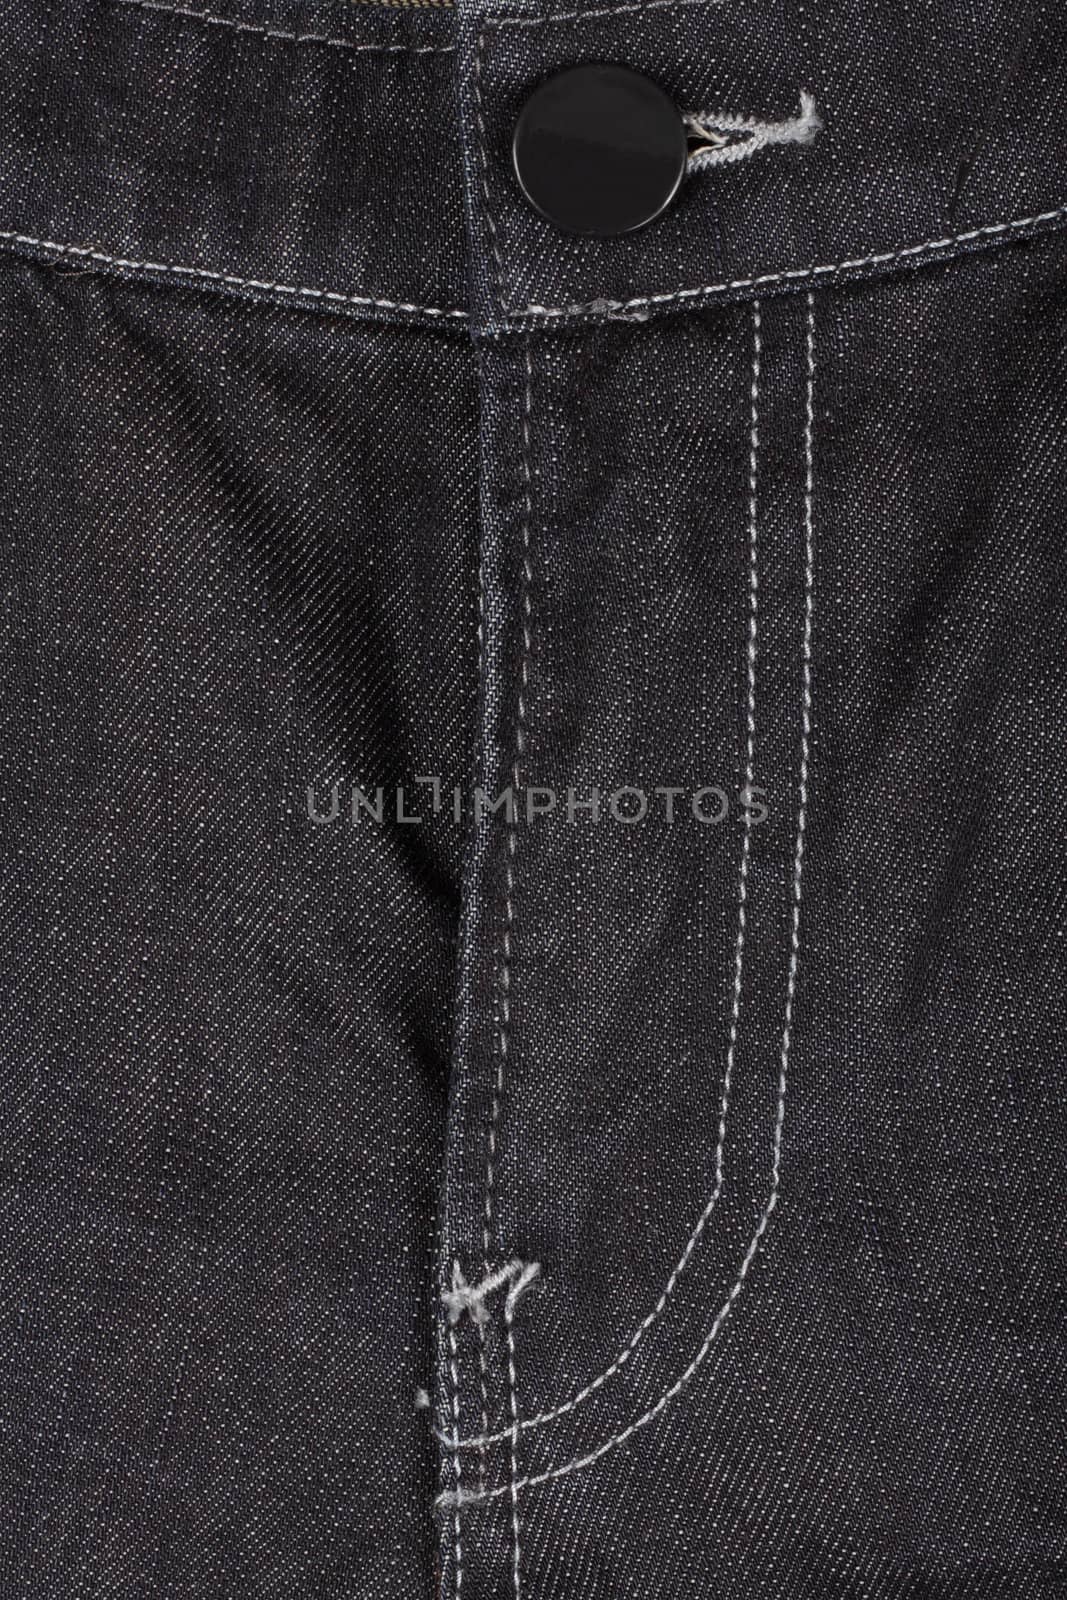 Black jeans trousers with the zipper, close up